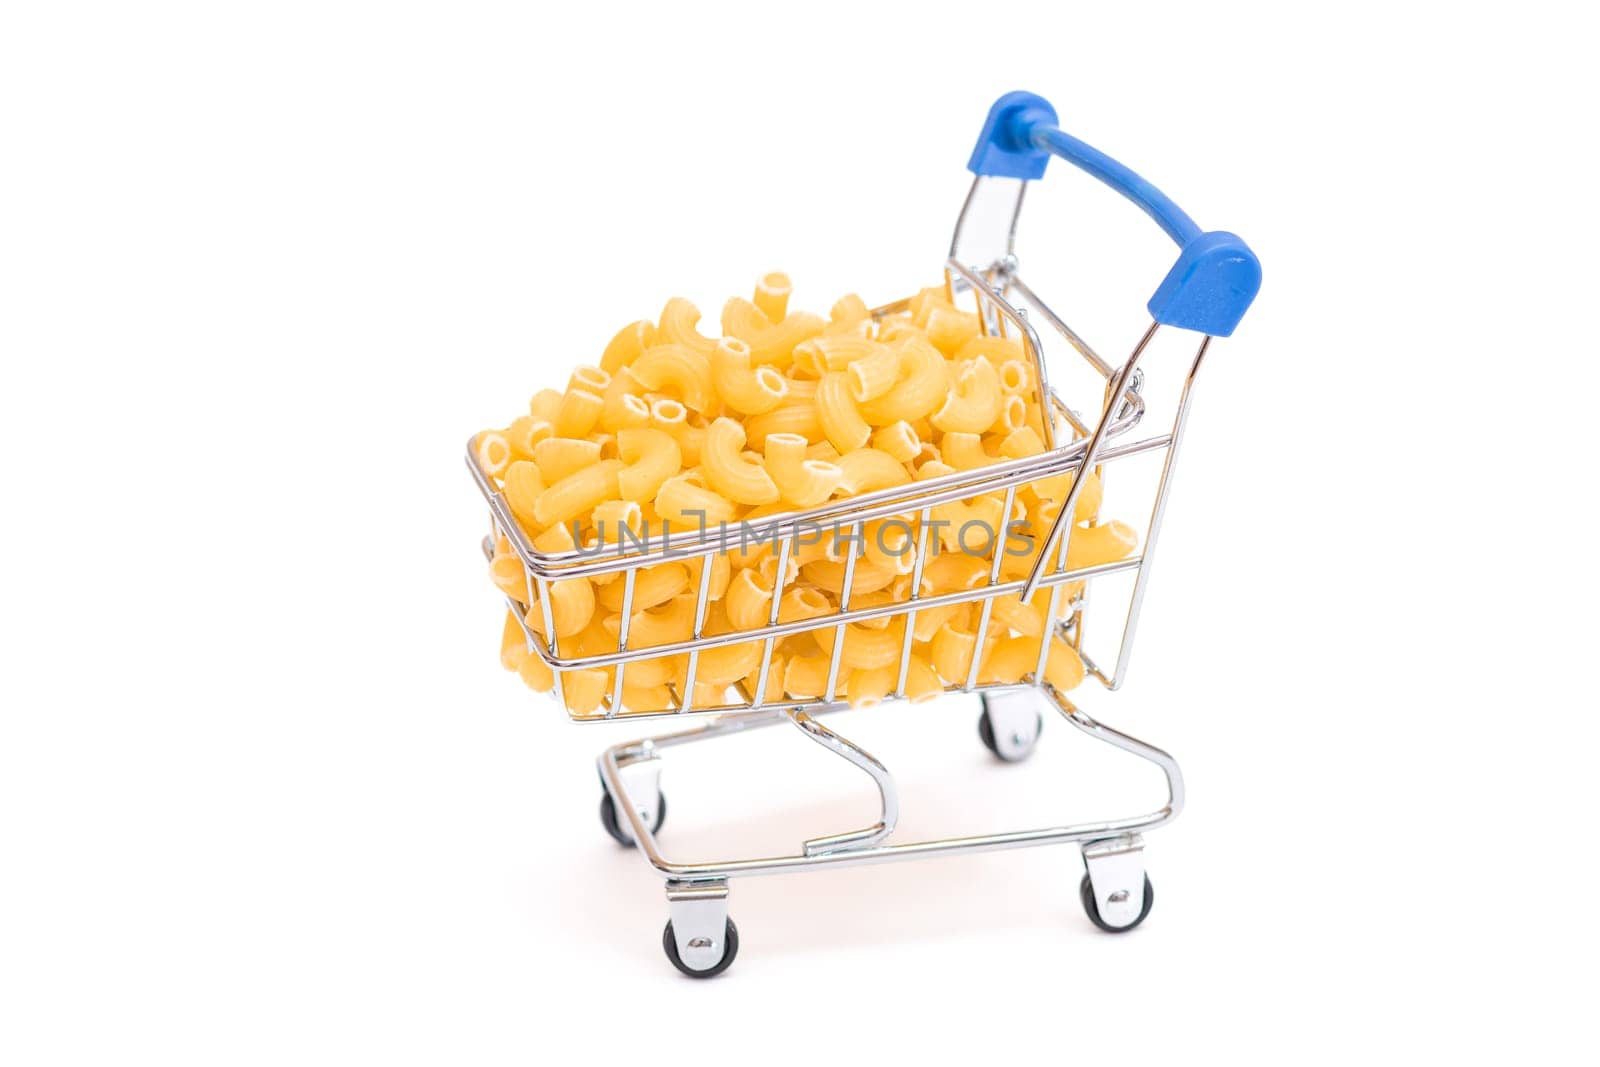 Uncooked Chifferi Rigati Pasta in Small Shopping Cart Isolated on White by InfinitumProdux